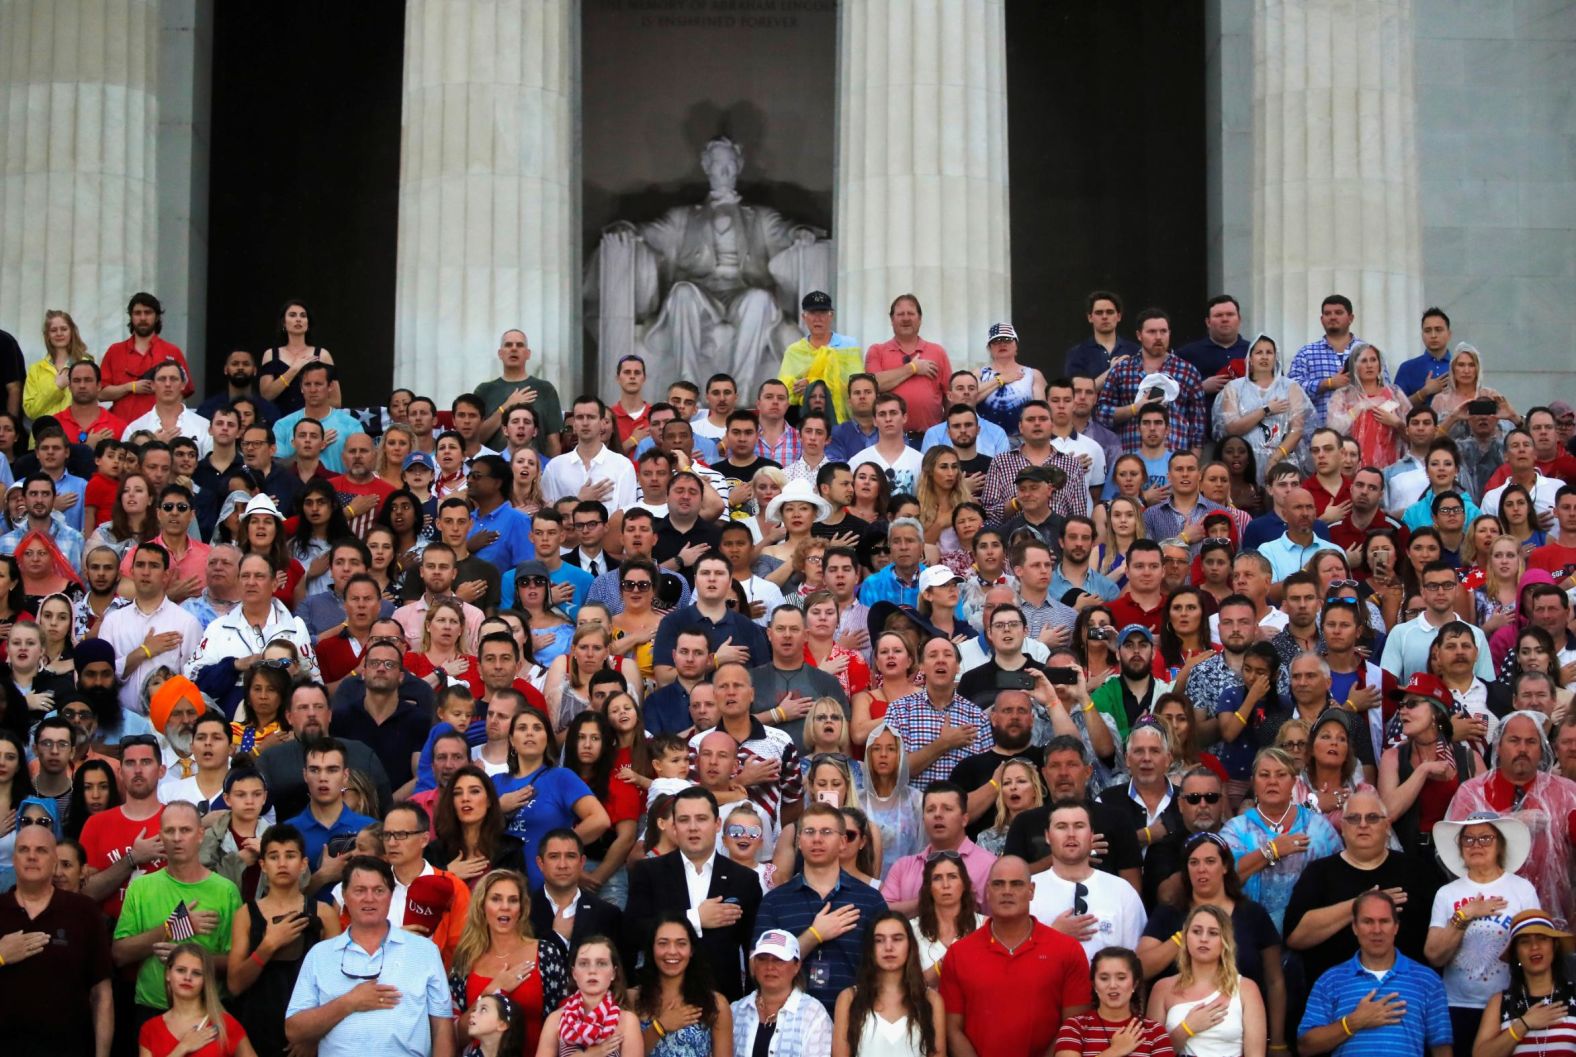 People attend the "Salute to America" event. Roughly 15,000 tickets were being issued for the event, and 500 of those were given for VIPs, <a href="index.php?page=&url=https%3A%2F%2Fwww.cnn.com%2F2019%2F07%2F02%2Fpolitics%2Fvip-tickets-white-house-show%2Findex.html" target="_blank">CNN reported.</a>